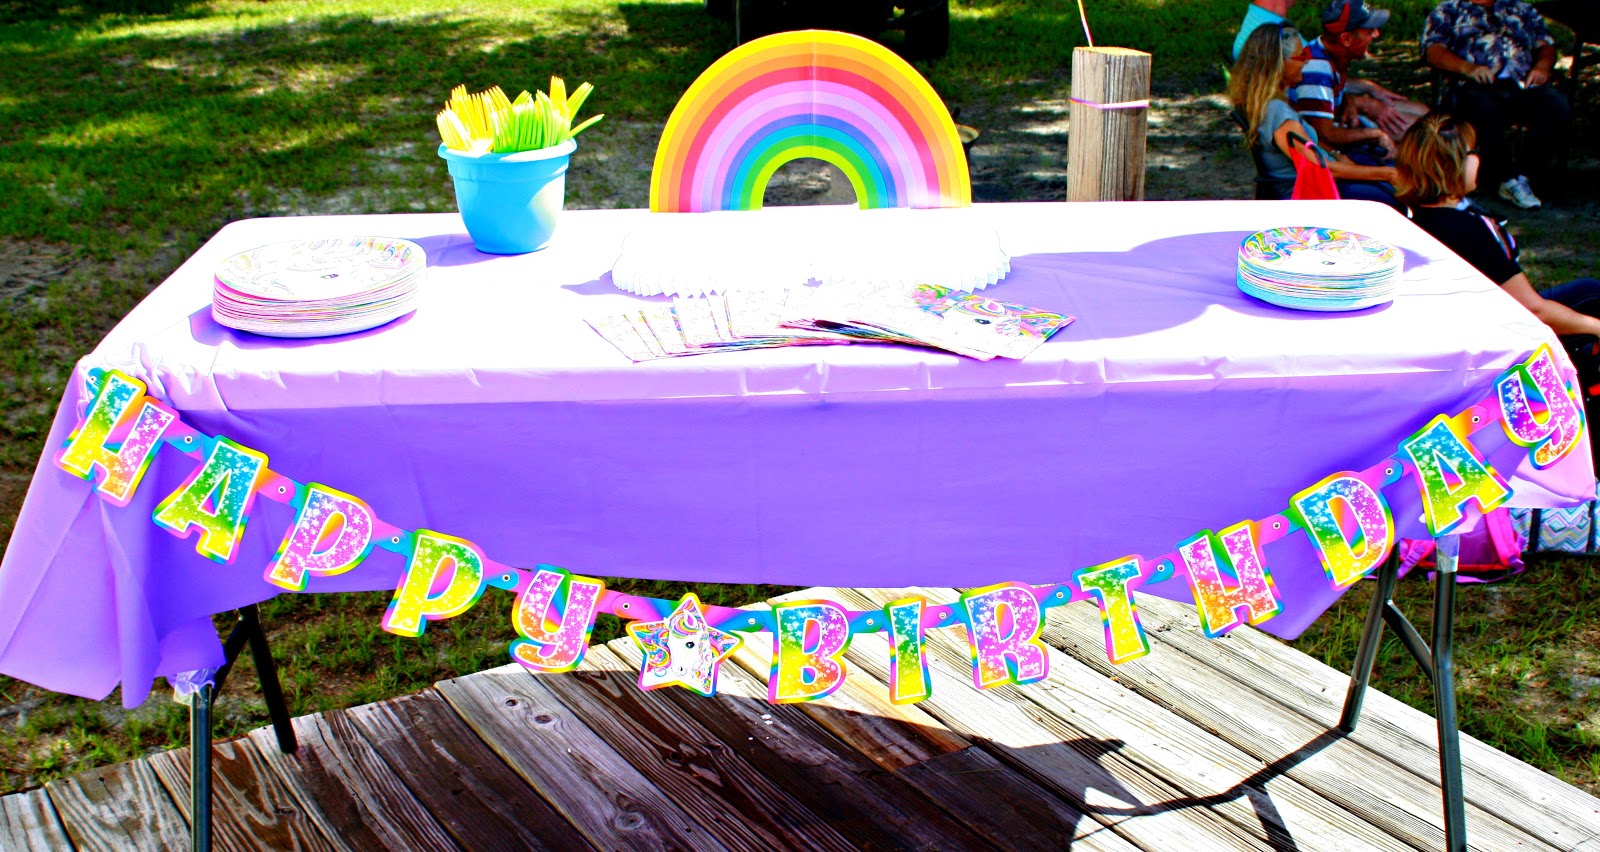 The Cozy Old Farmhouse: A 50¢ Makeover & a Lisa Frank 8th Birthday Party